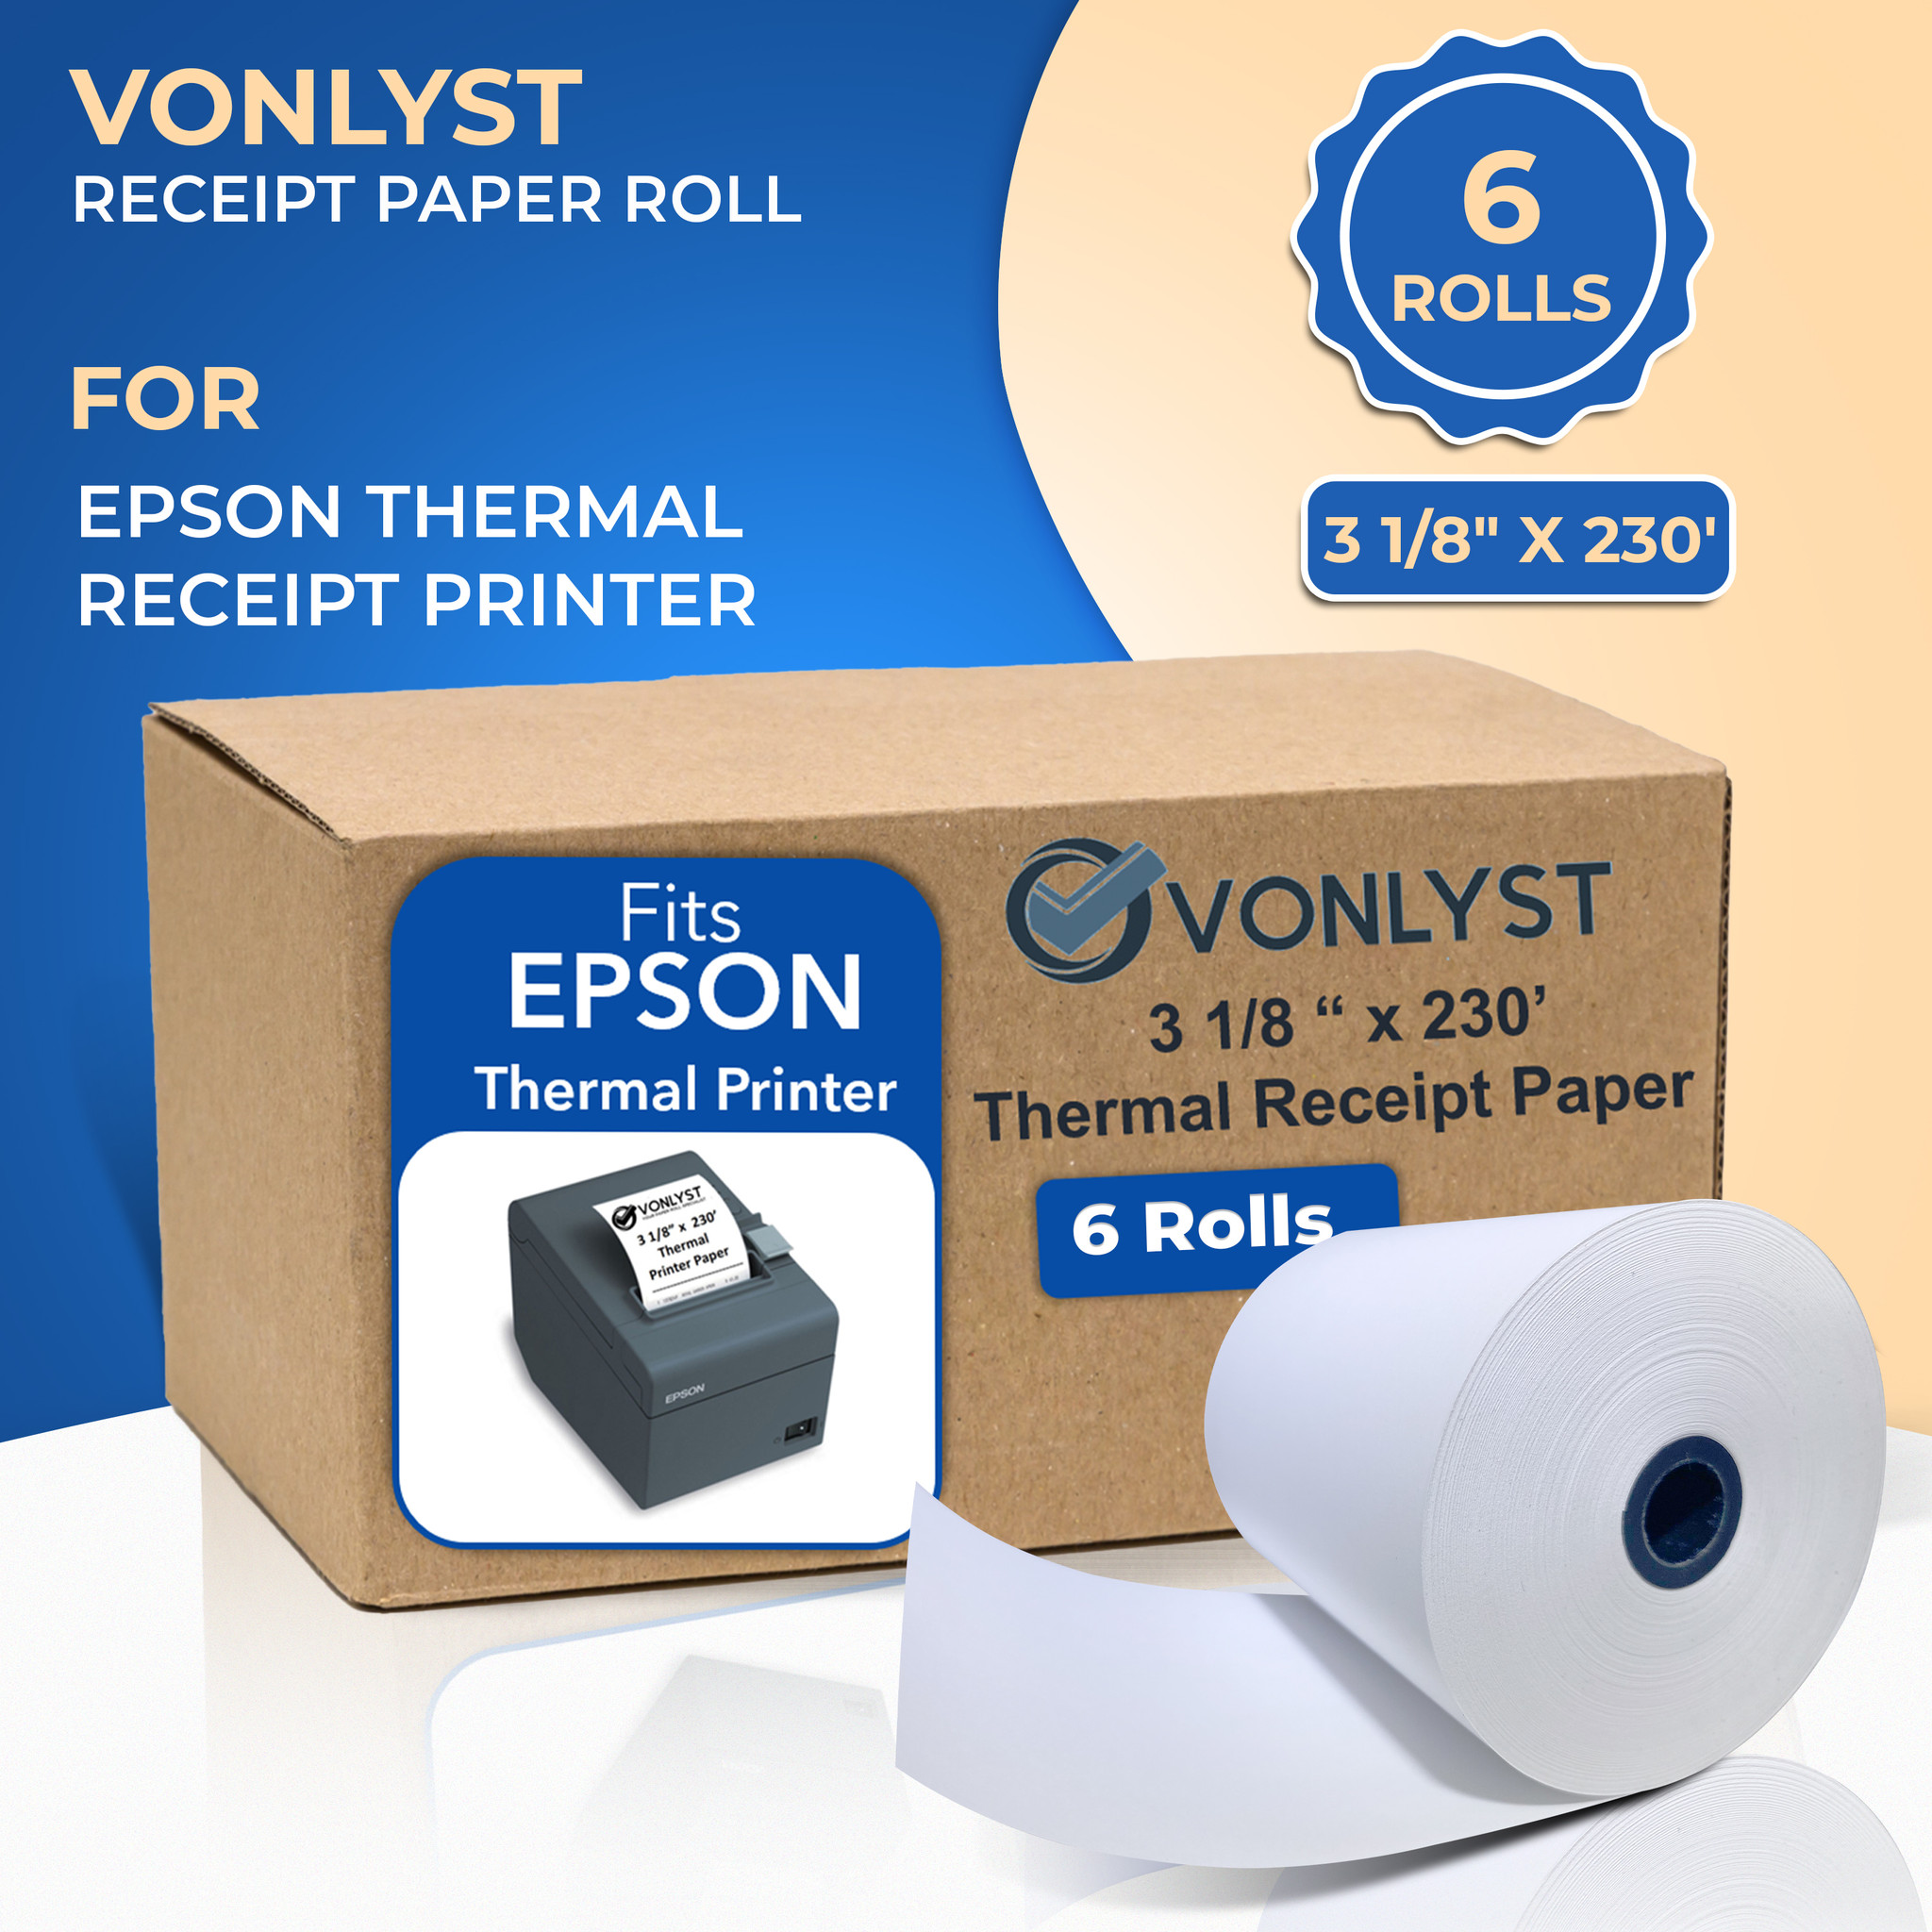 Epson Thermal Receipt Paper Roll 3 1/8 x 230' - Box with 06